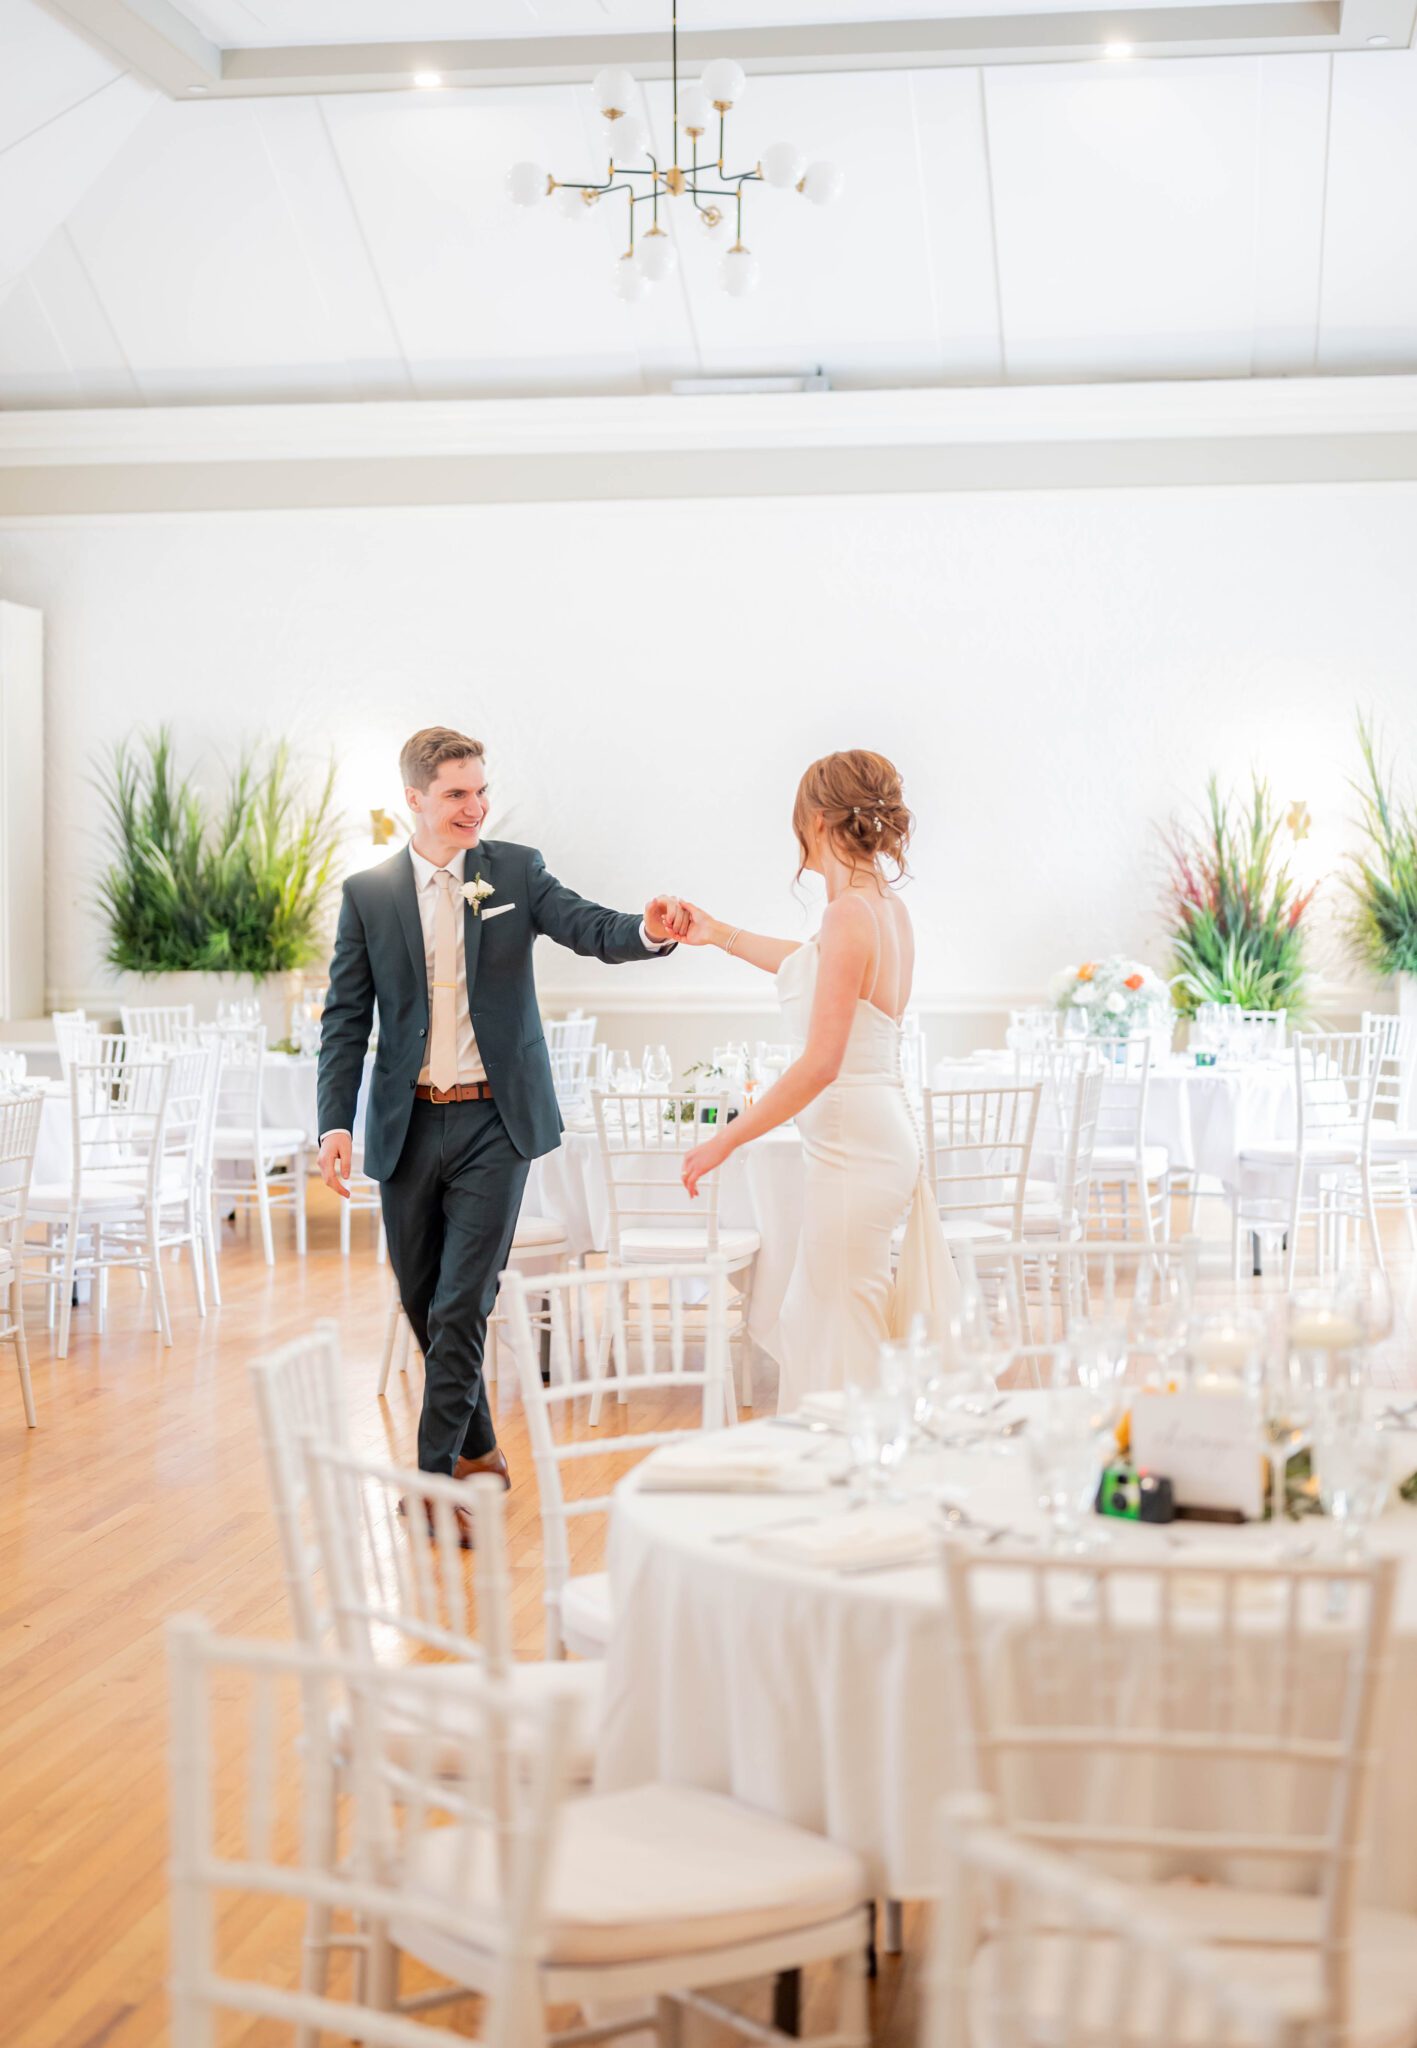 Bride and groom enjoy a private first dance together before their guests enter the bright, elegant reception room, classic Calgary wedding inspiration. 